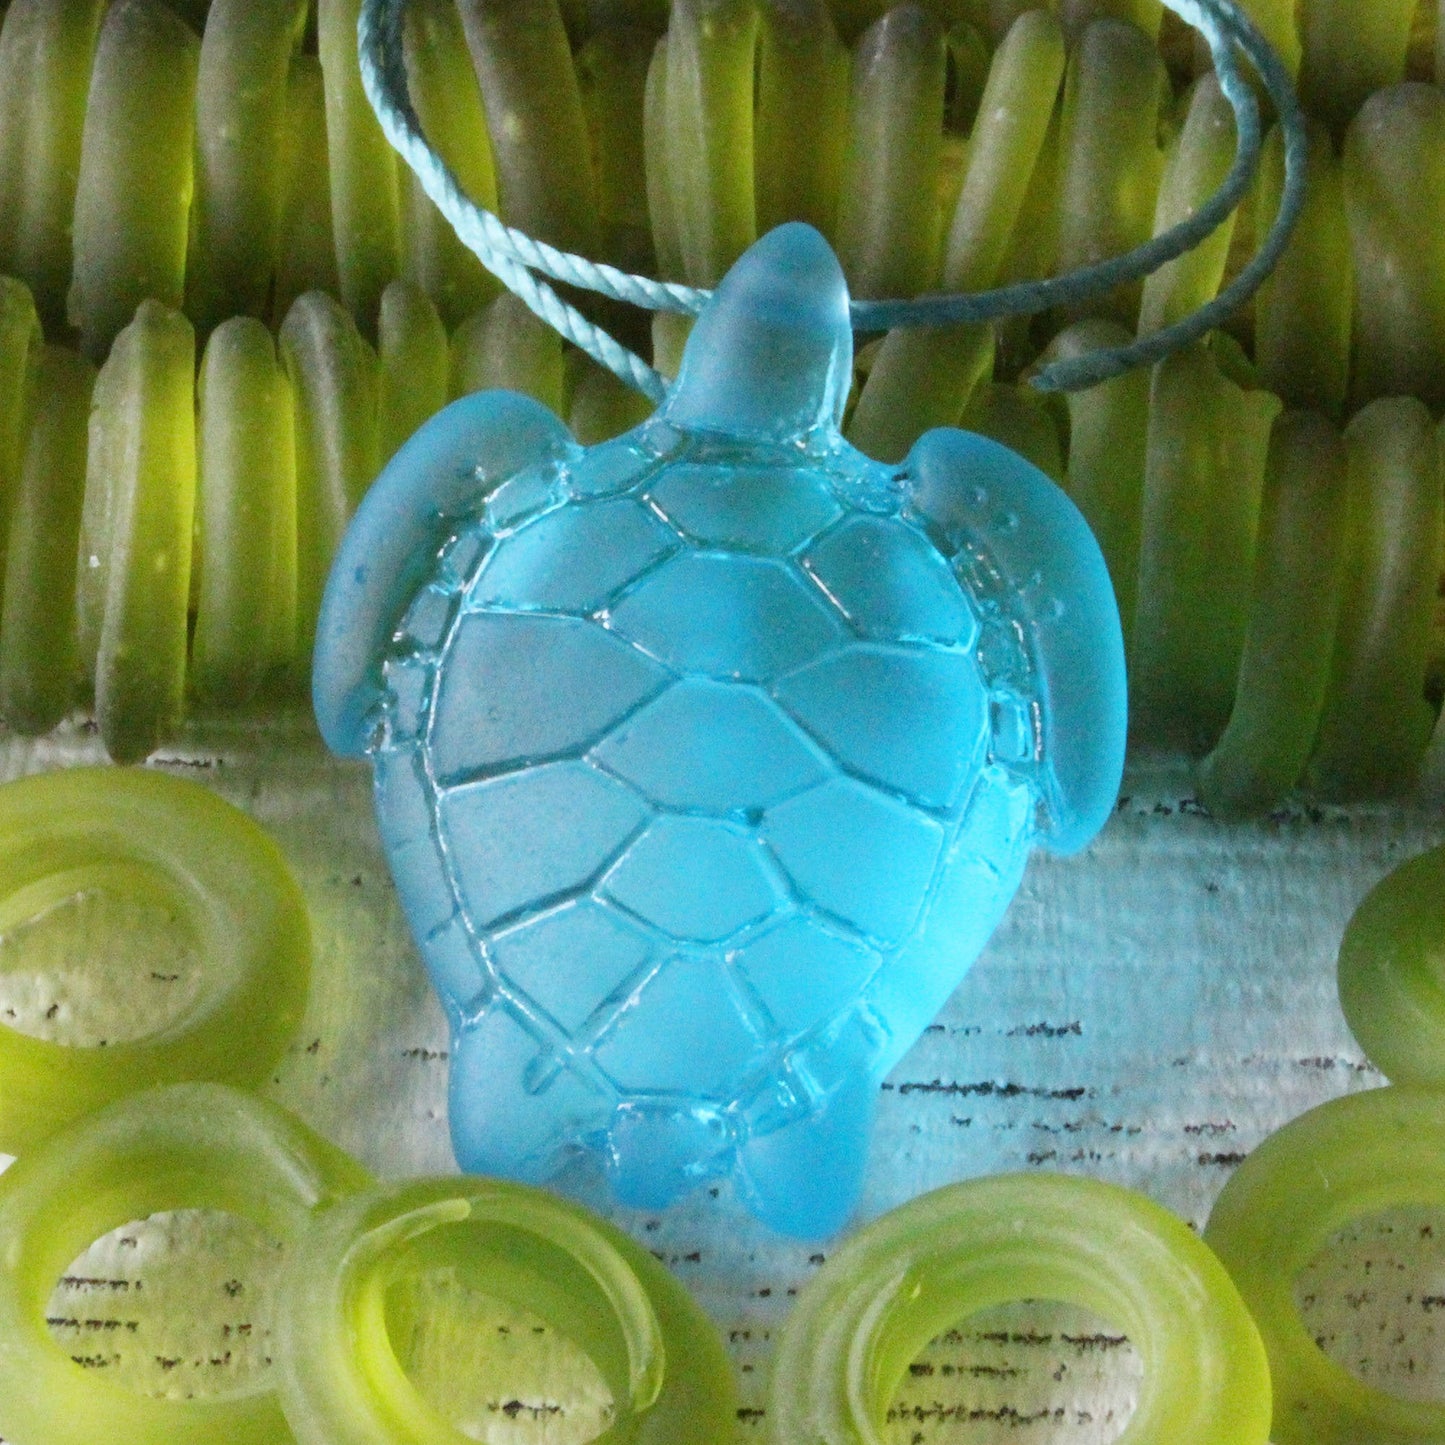 Load image into Gallery viewer, Large Frosted Glass Turtle Pendant - Medium Aqua - 2 Beads
